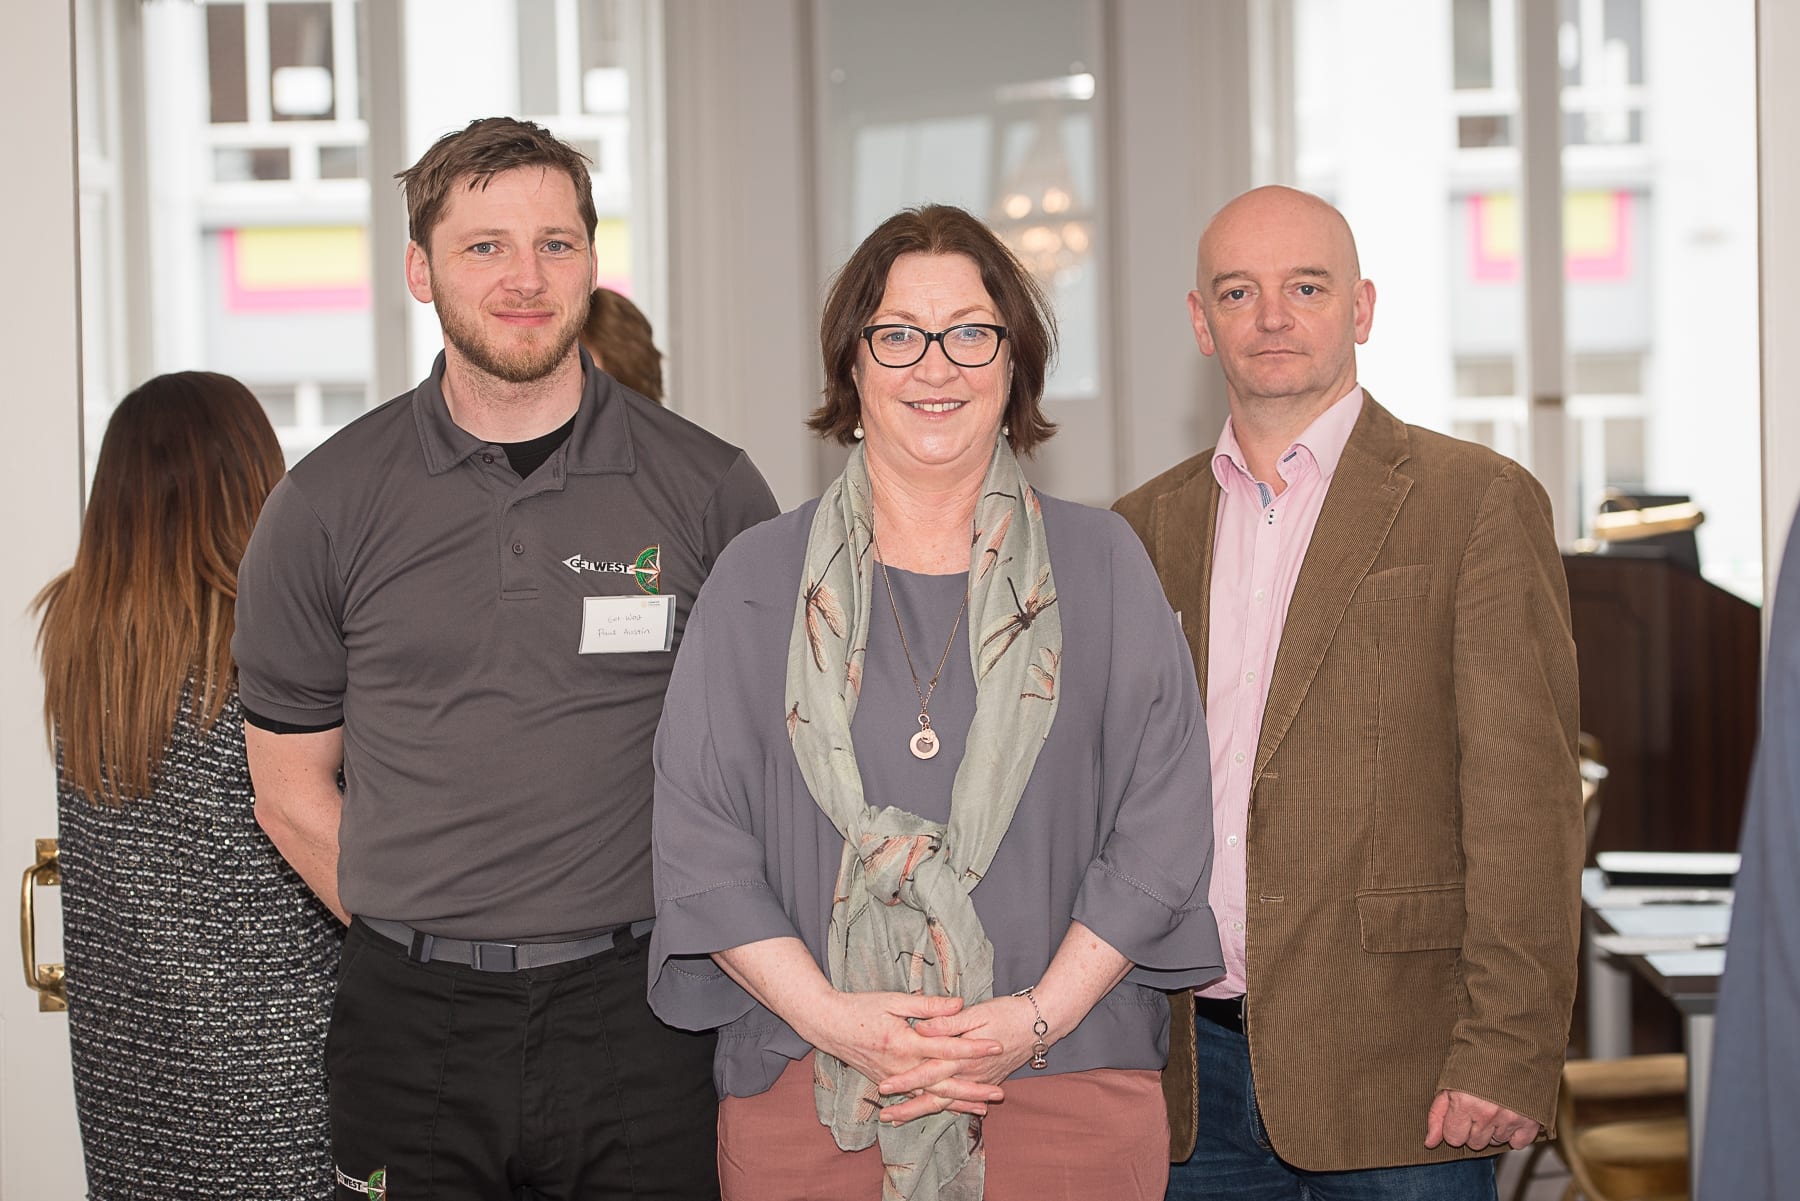 At the Limerick Chamber Skillnet Working Lunchtime Networking with Donal Fitzgibbon was From left to right: Paul Austin - Get West, Teresa Landers- UL,  Fergus Chawke -Employmum
Image by Morning Star Photography 